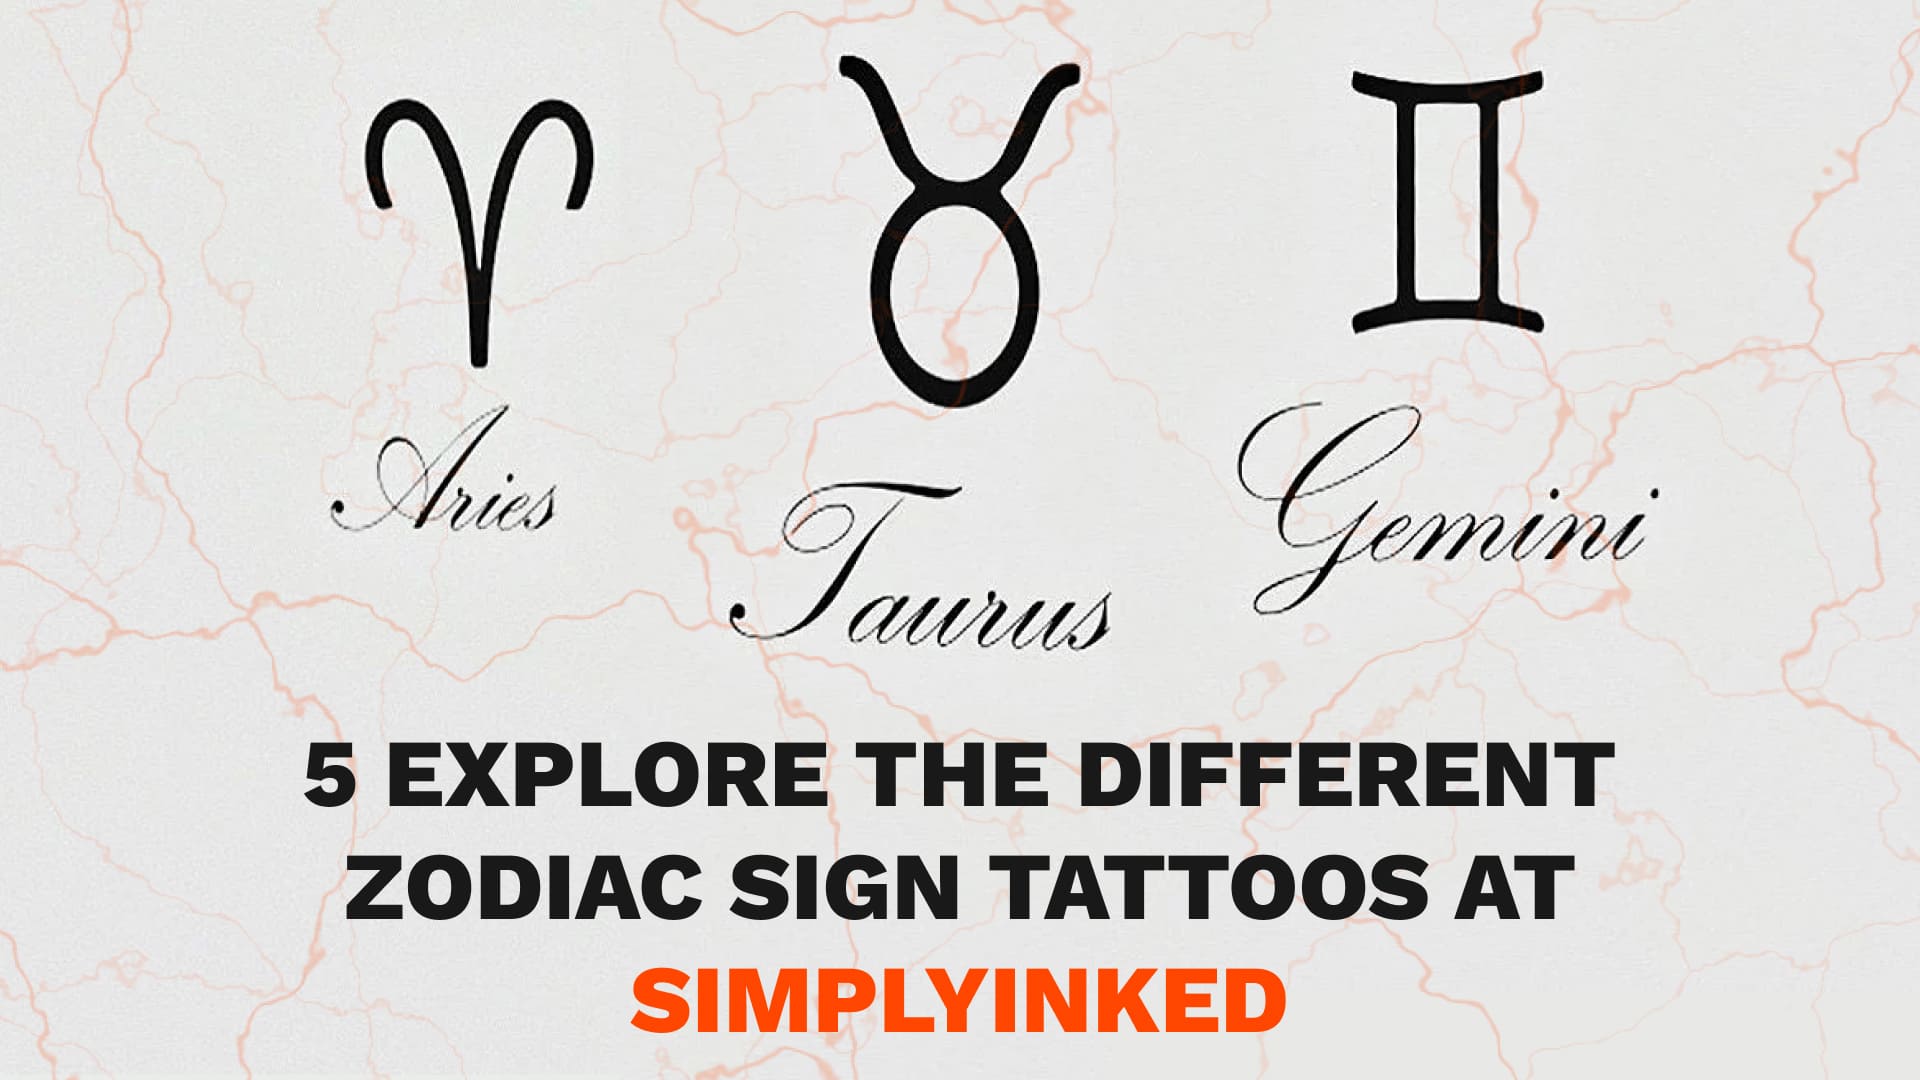 Explore the Different Zodiac Sign Tattoos at Simply Inked